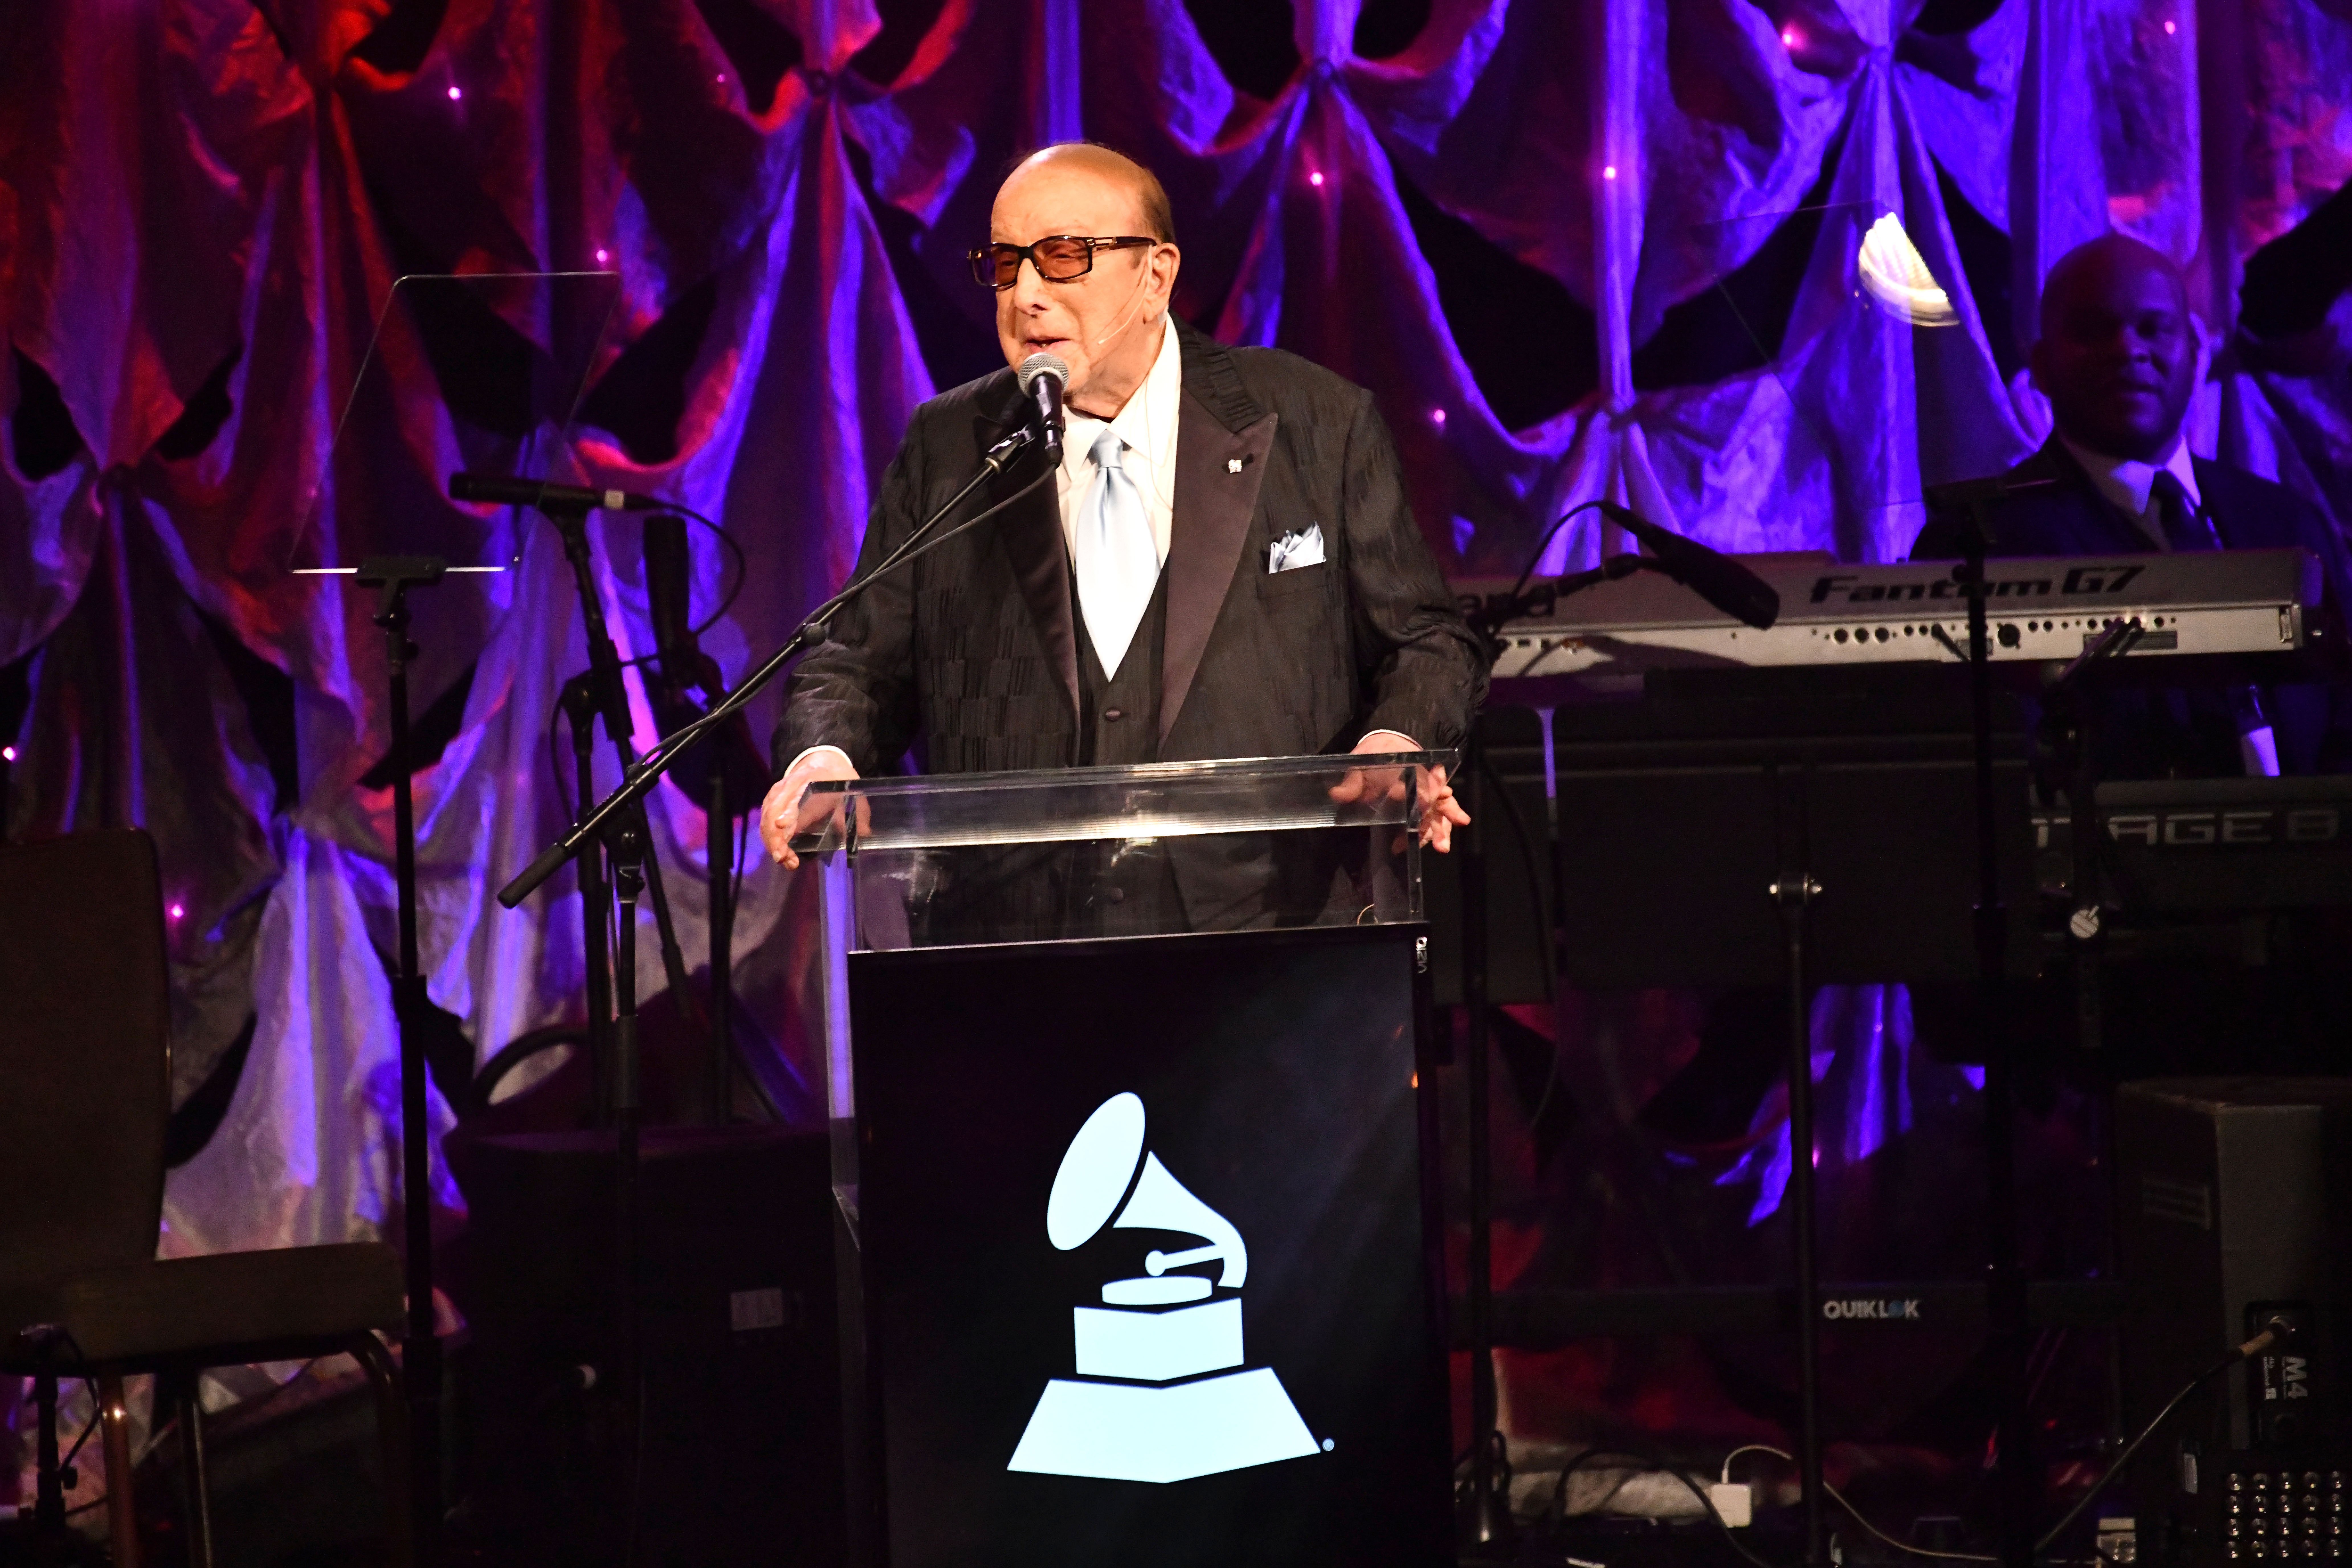 Musical Producer Clive Davis delivering a speech at the pre-Grammys party | Photo: Getty Images